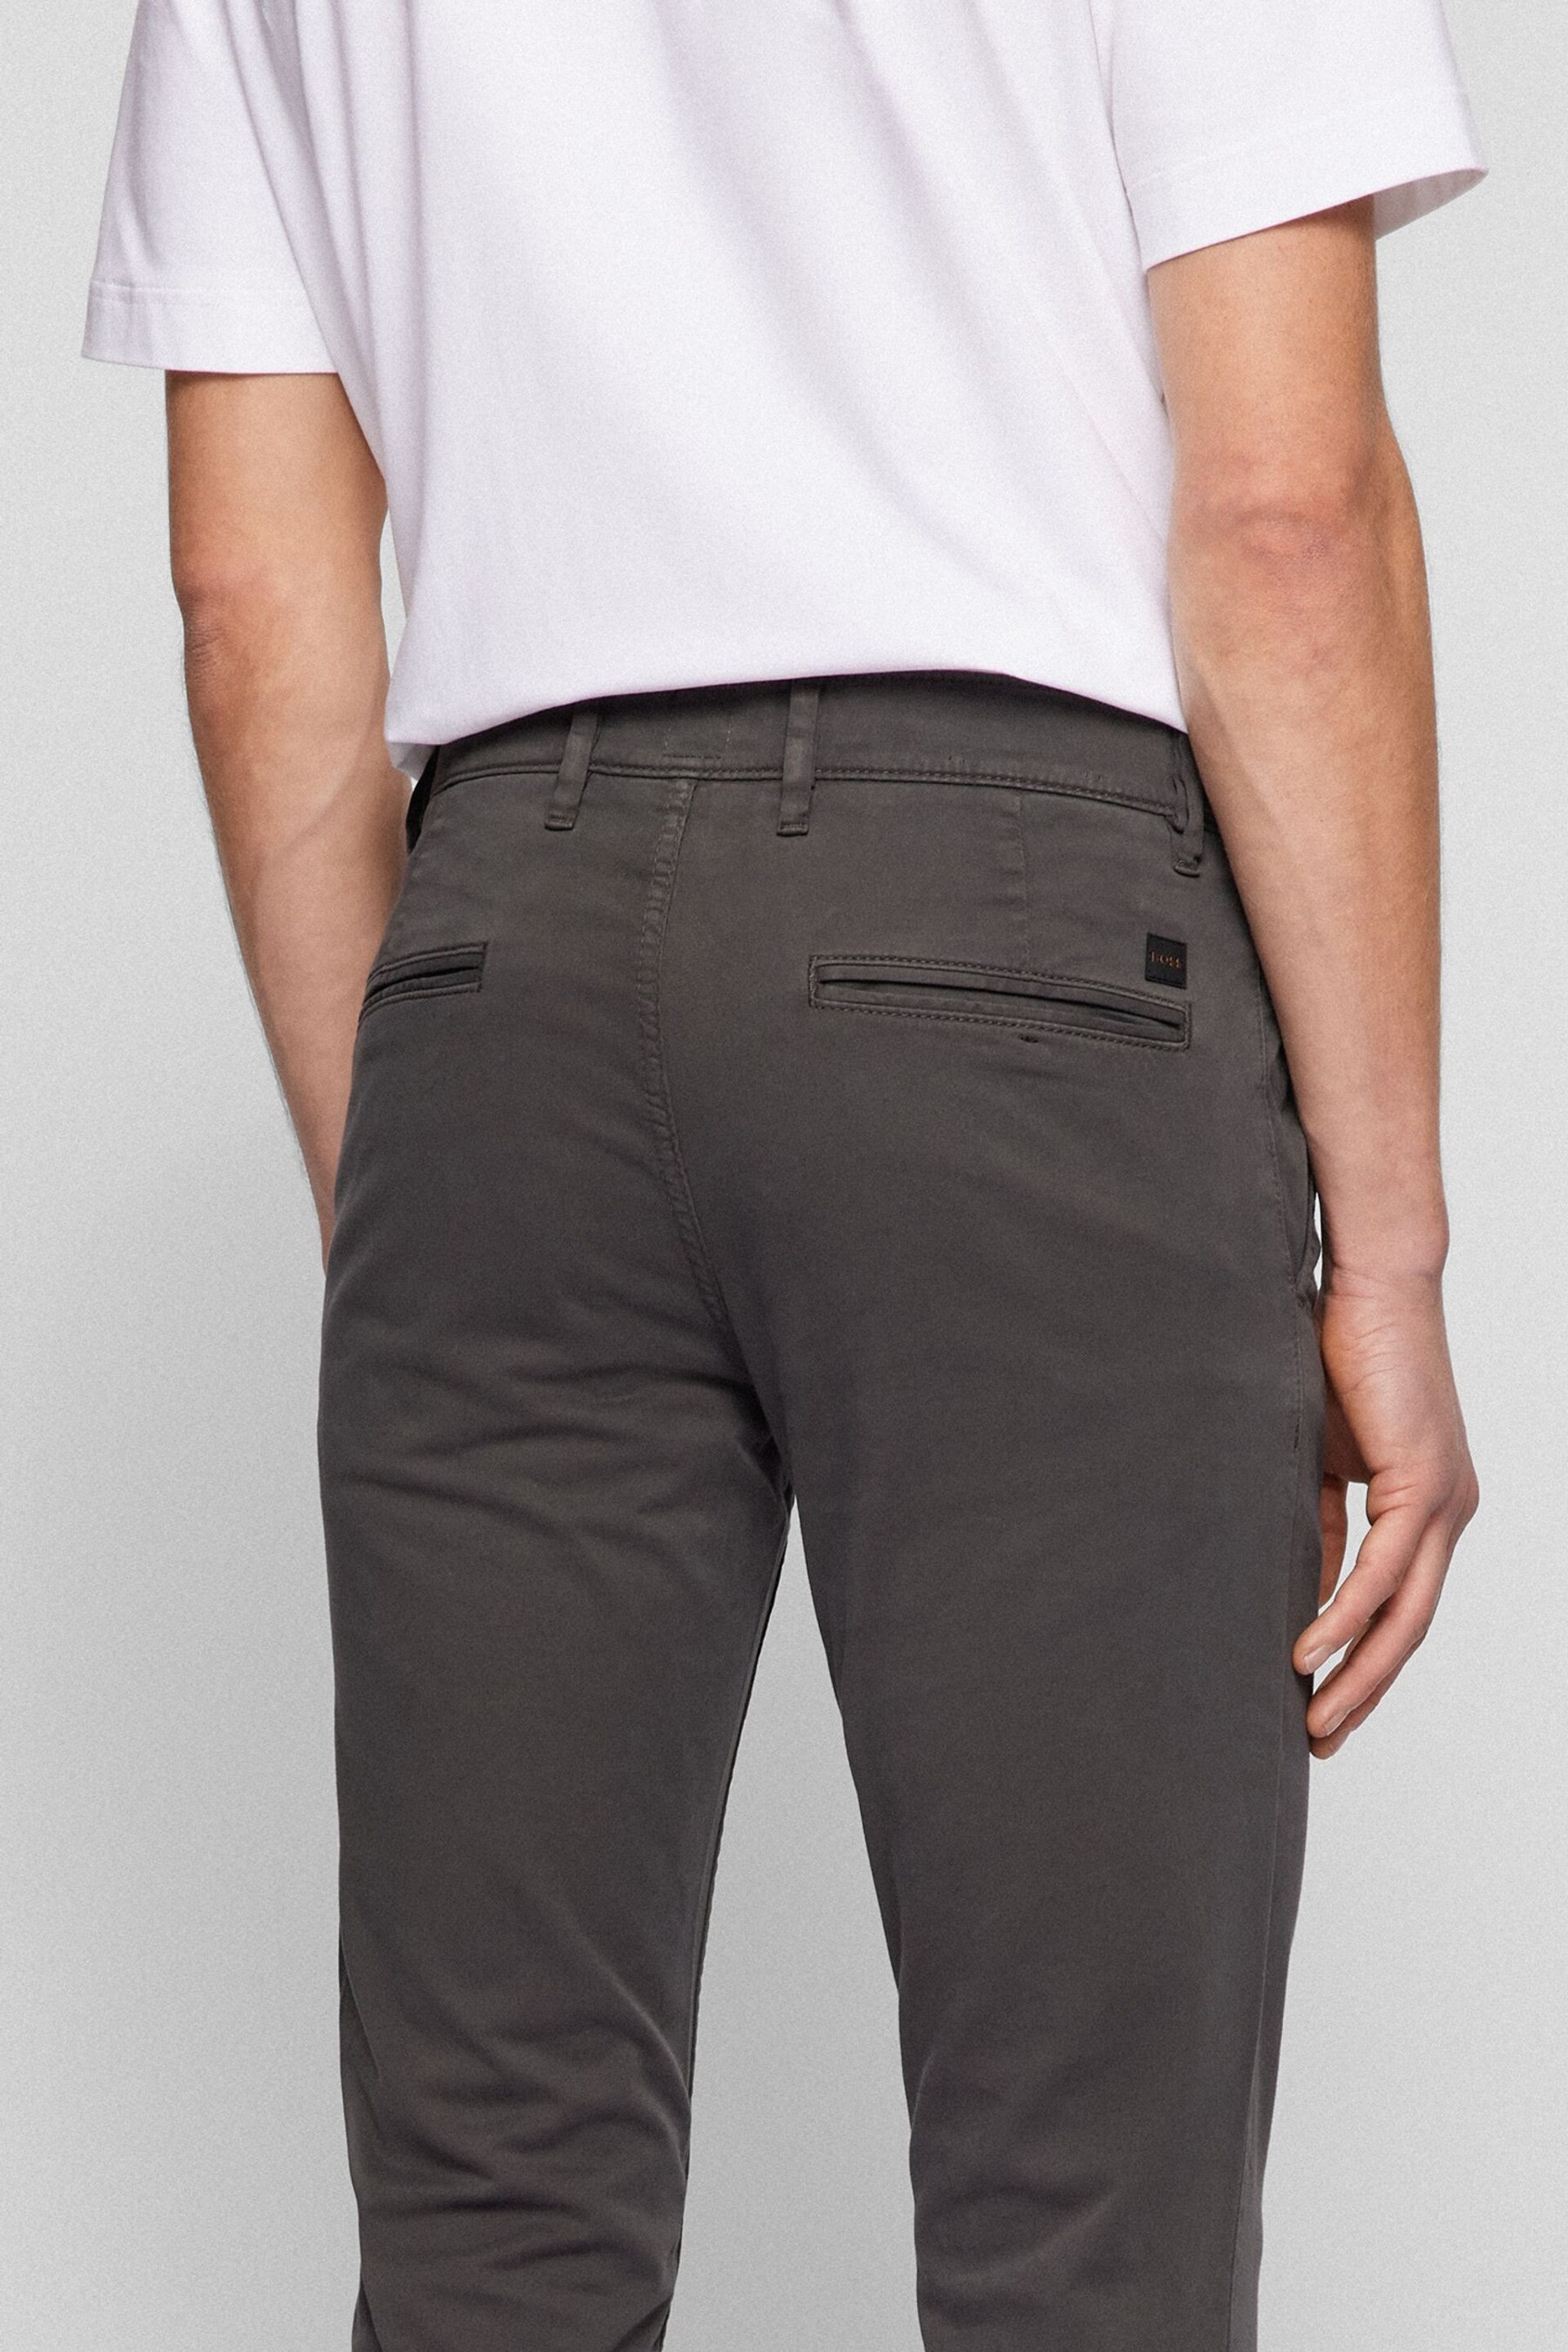 BOSS Charcoal Grey Schino Slim Fit Chinos - Image 3 of 5